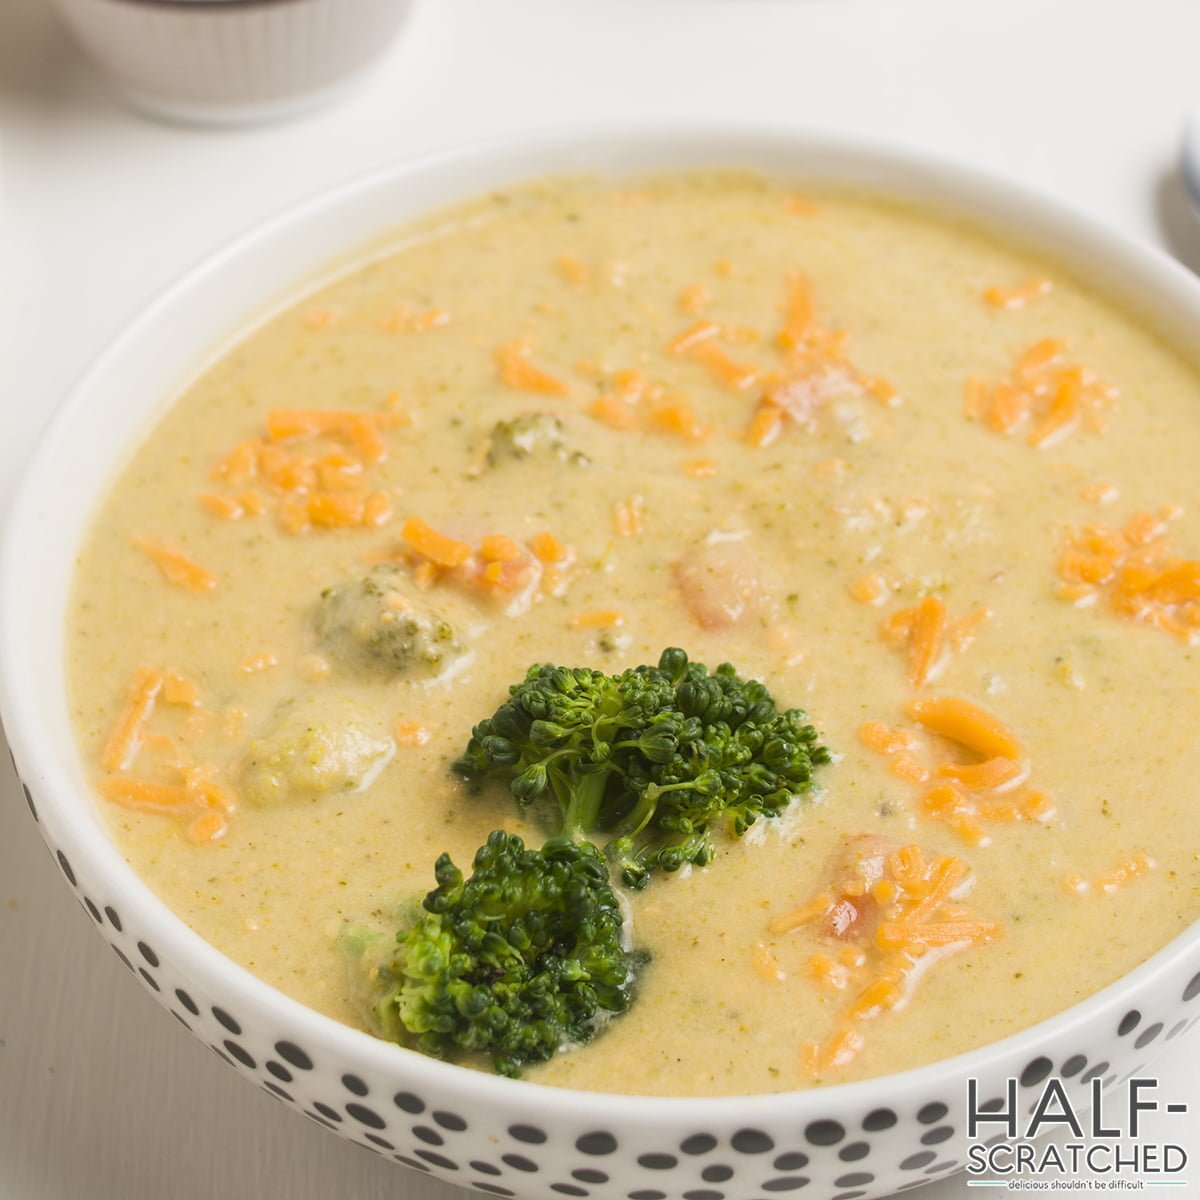 Close view of a bowl with broccoli and cheddar soup